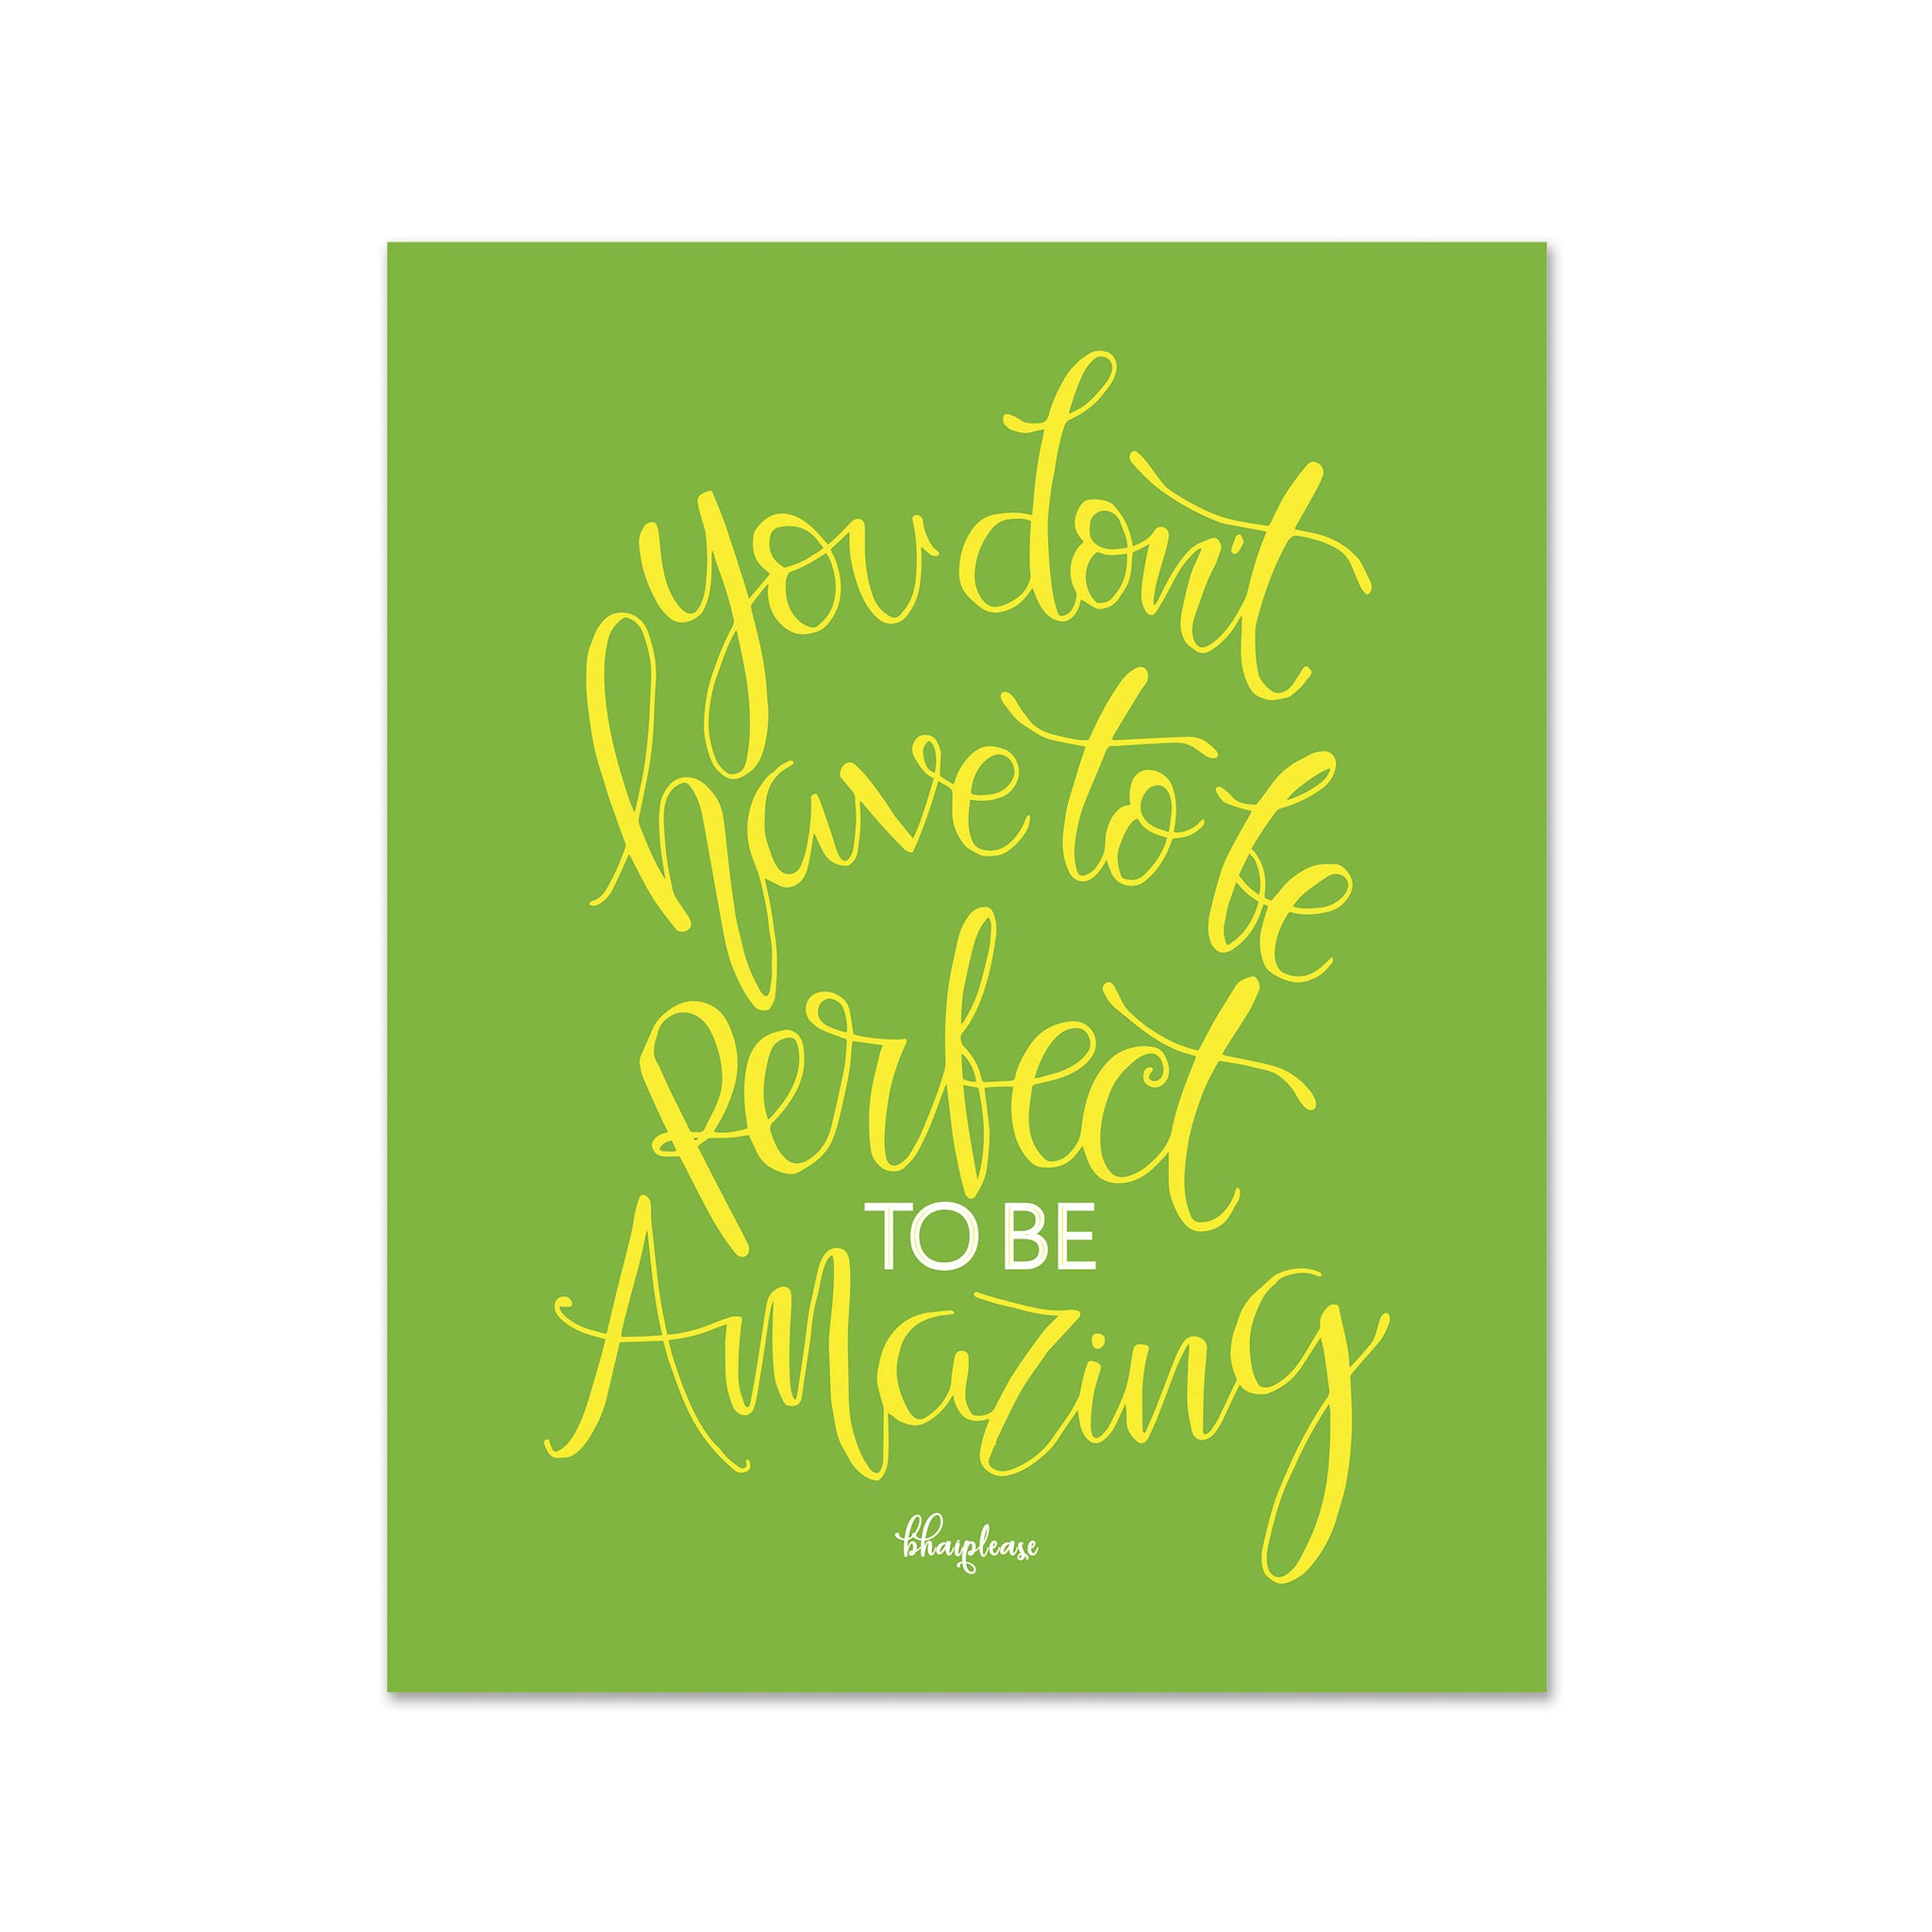 You Don't Have to be Perfect to be Amazing (Green) Wooden Fridge / Refrigerator Magnet